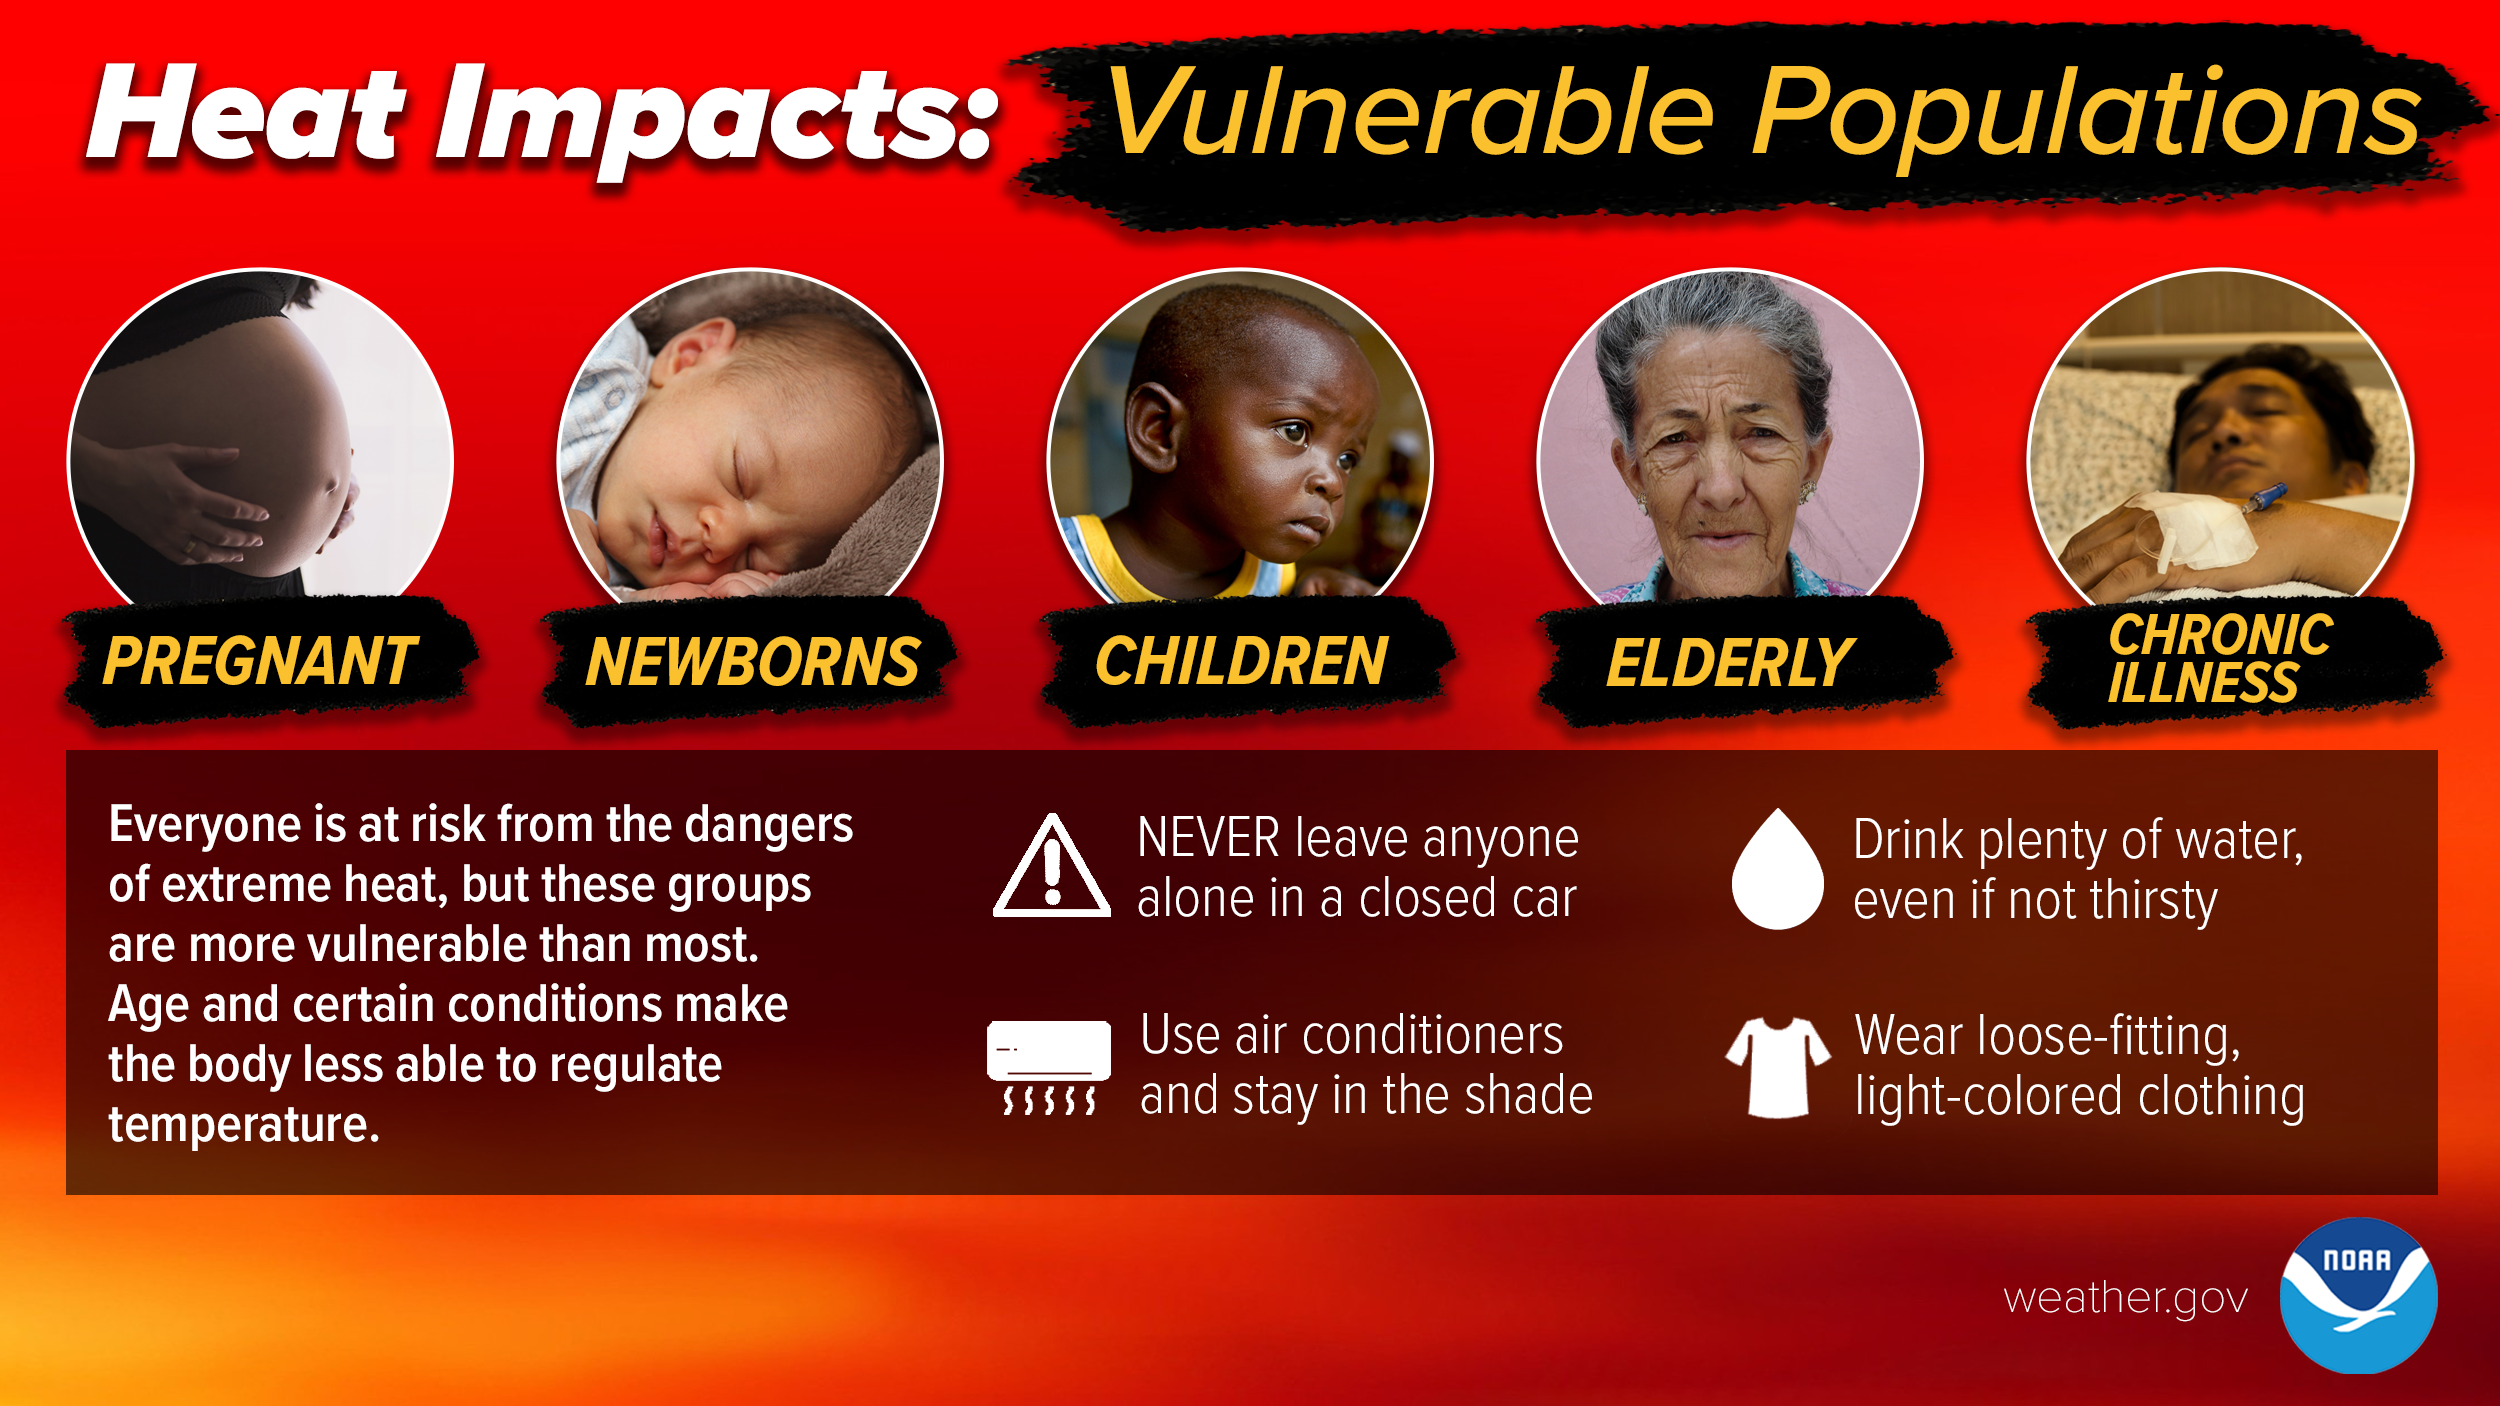 Heat Impacts on Vulnerable Populations. Everyone is at risk from the dangers of extreme heat, but these groups are more vulnerable than most: pregnant, newborns, children, elderly, chronic illness. Age and certain conditions make the body less able to regulate temperature. Never leave anyone alone in a closed car. Use air conditioners and stay in the shade. Drink plenty of water, even if not thirsty. Wear loose-fitting, light-colored clothing.